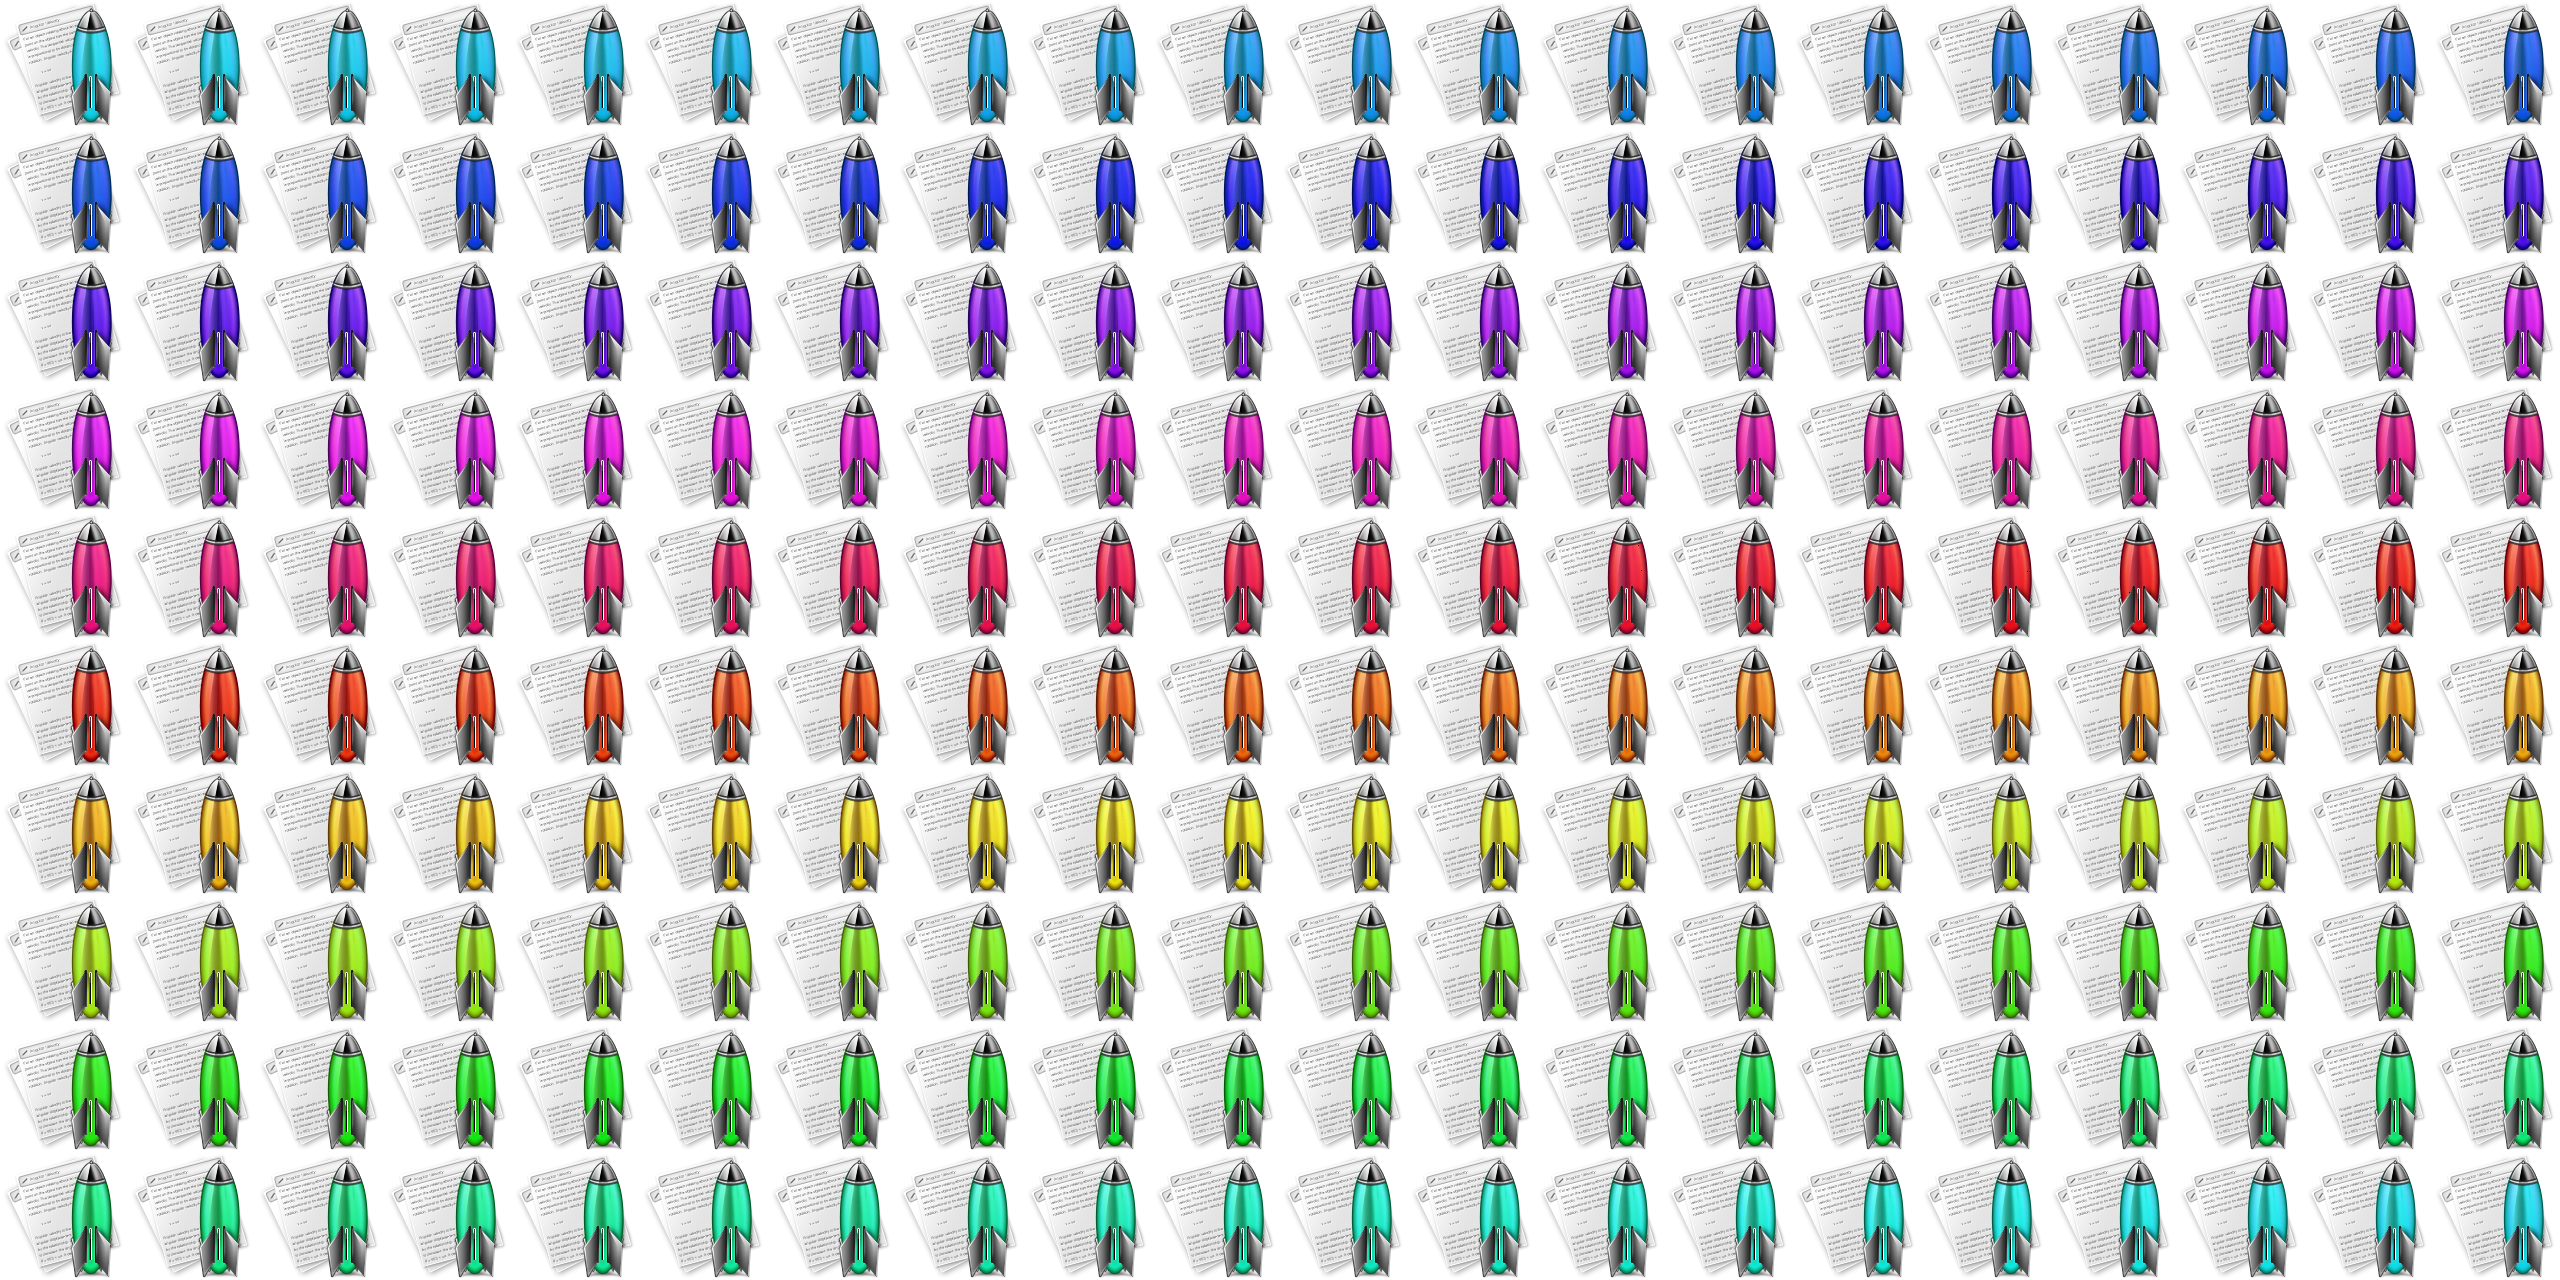 A grid of multi-coloured Notational Velocity icons